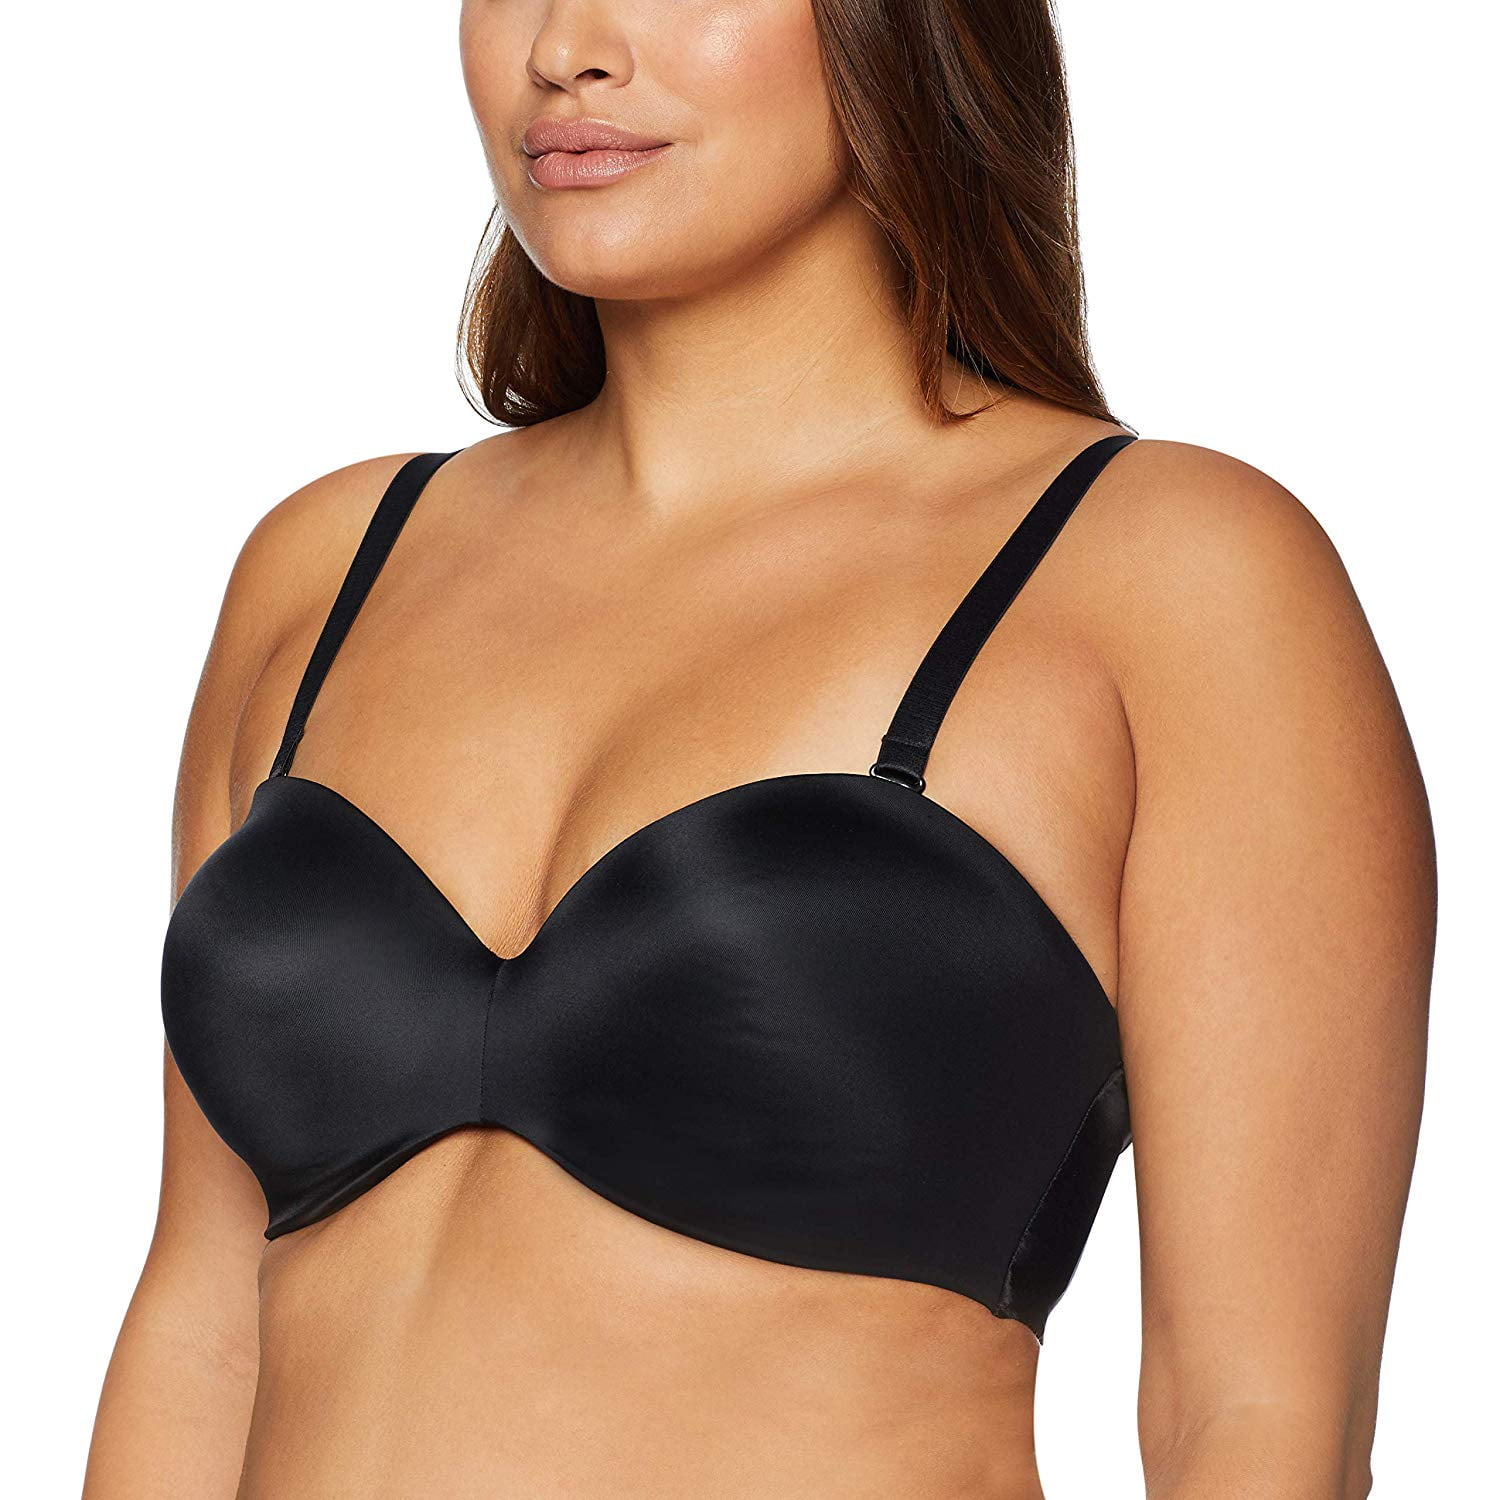 CURVY COUTURE Black Smooth Multi-Way Strapless Bra, US 42G, NWOT 